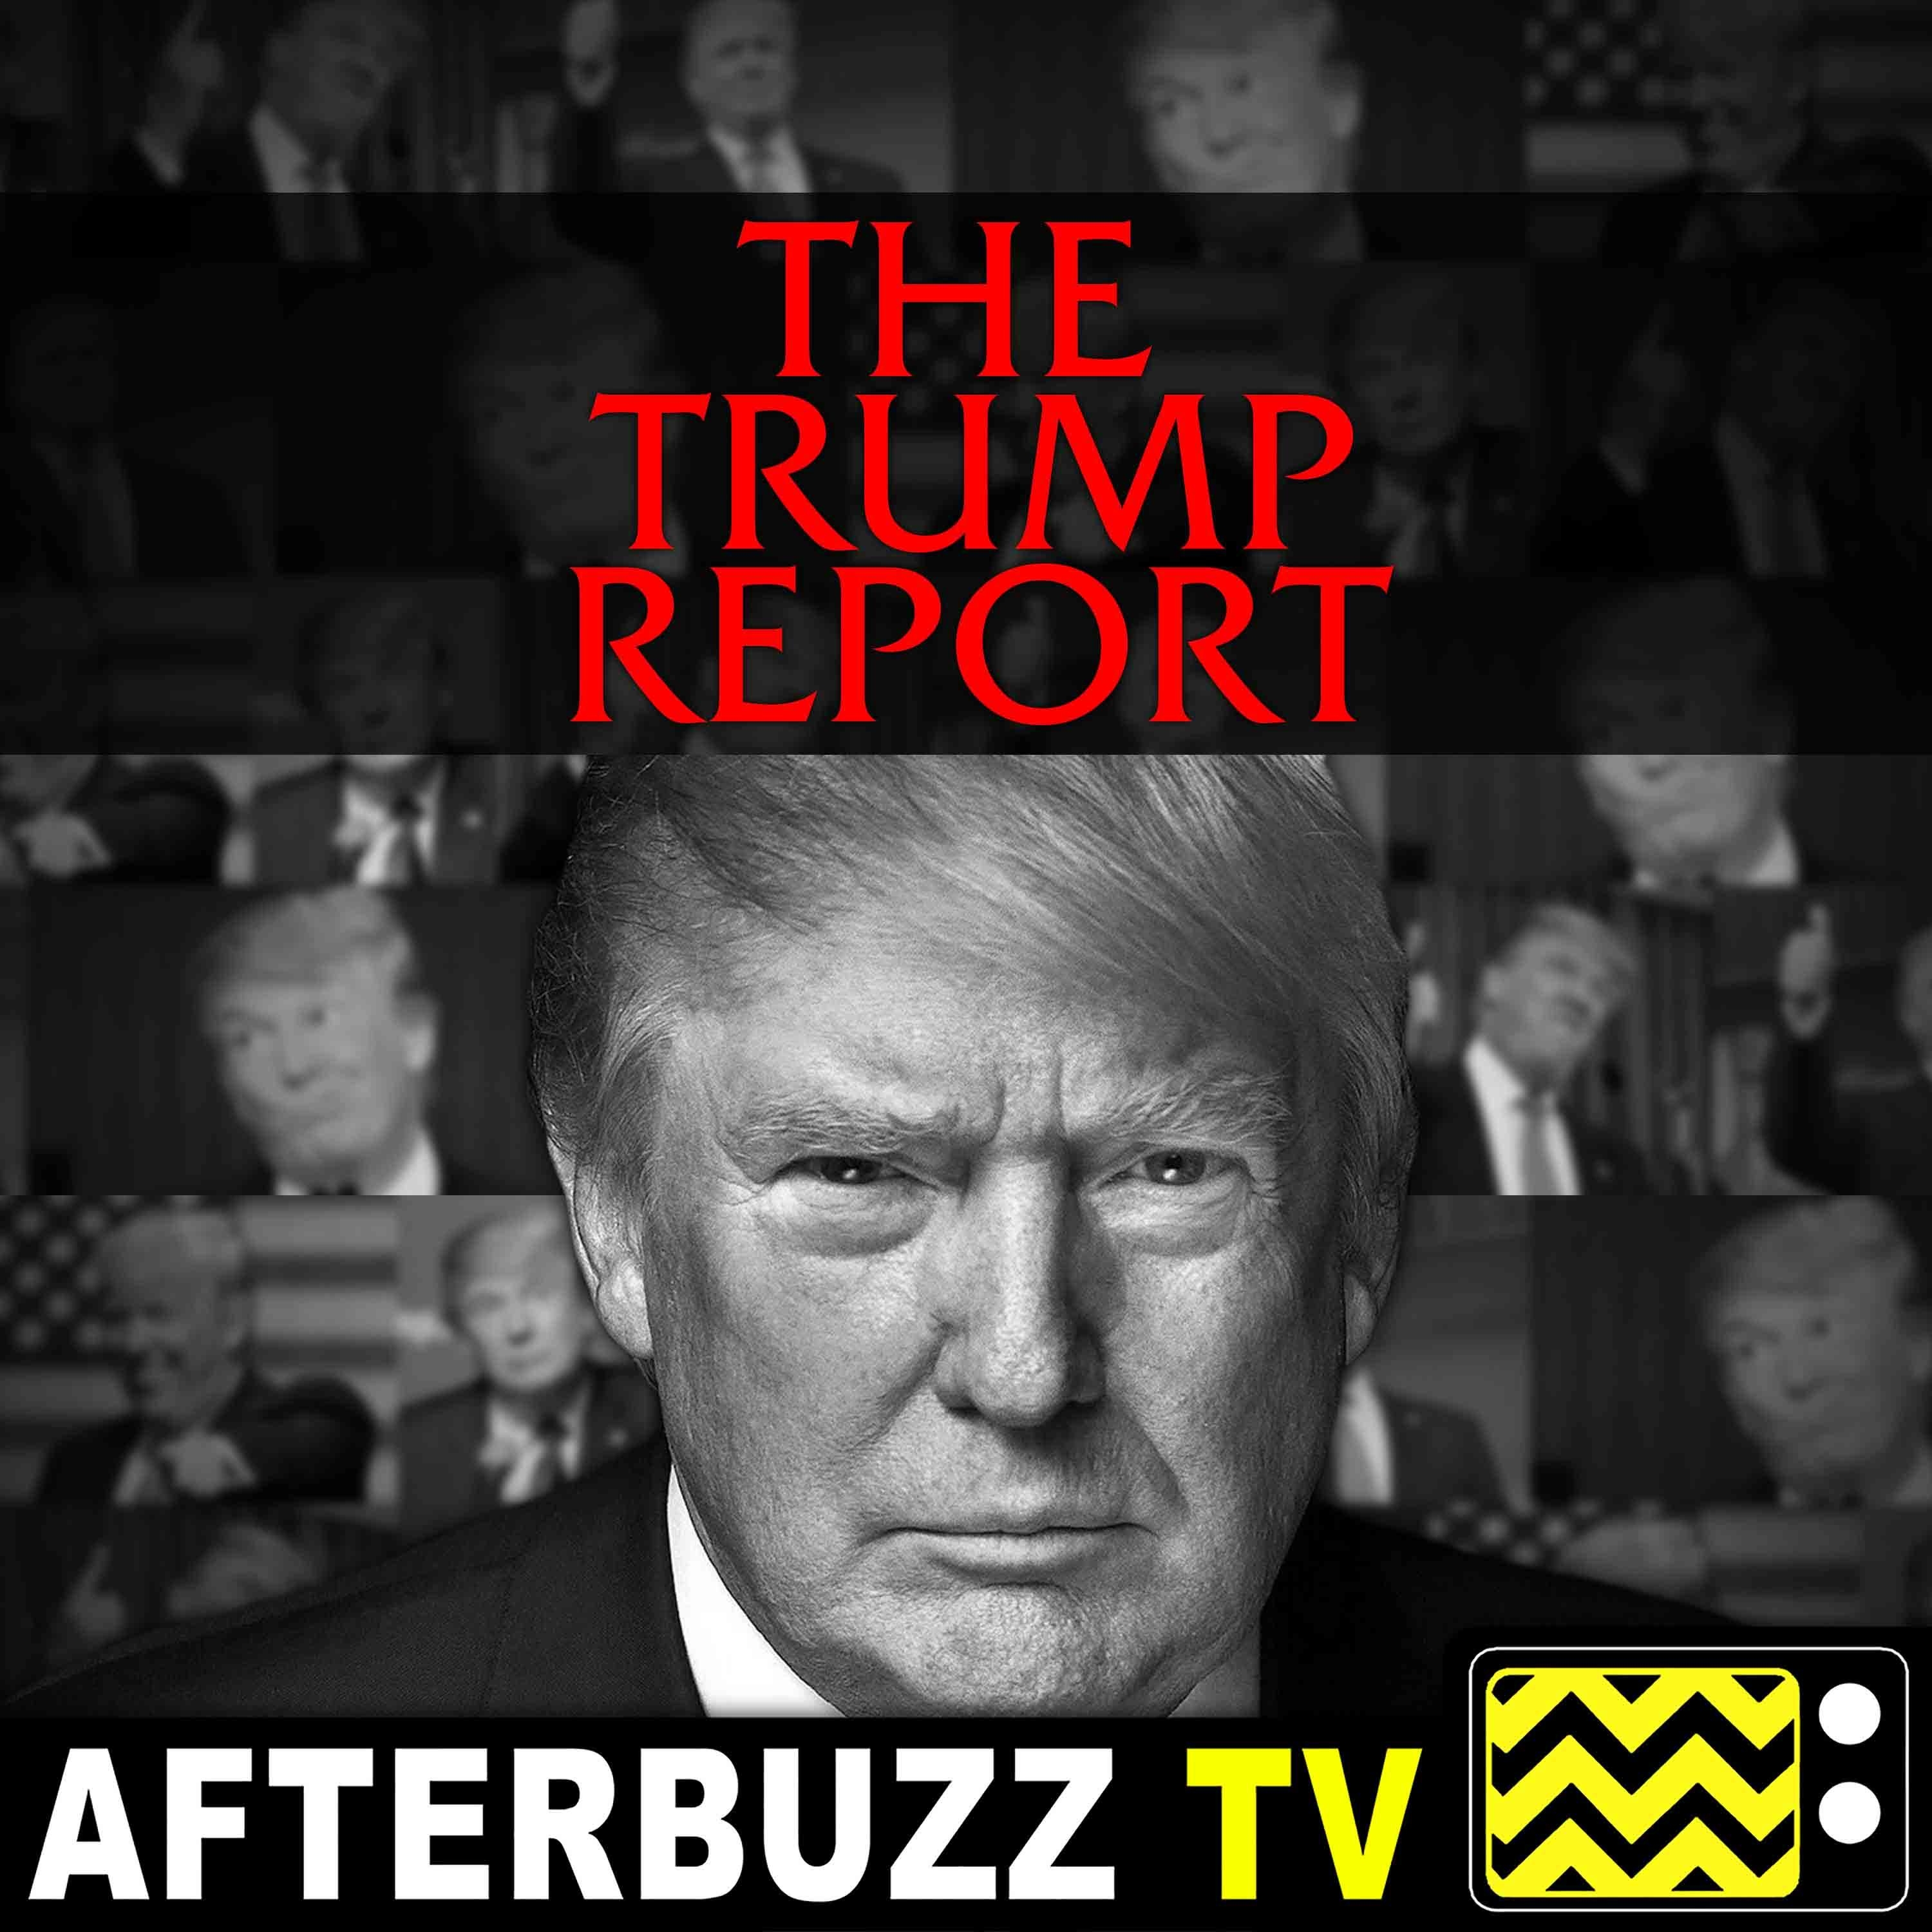 The Trump Report | Let’s Spend the Night Together | AfterBuzz TV